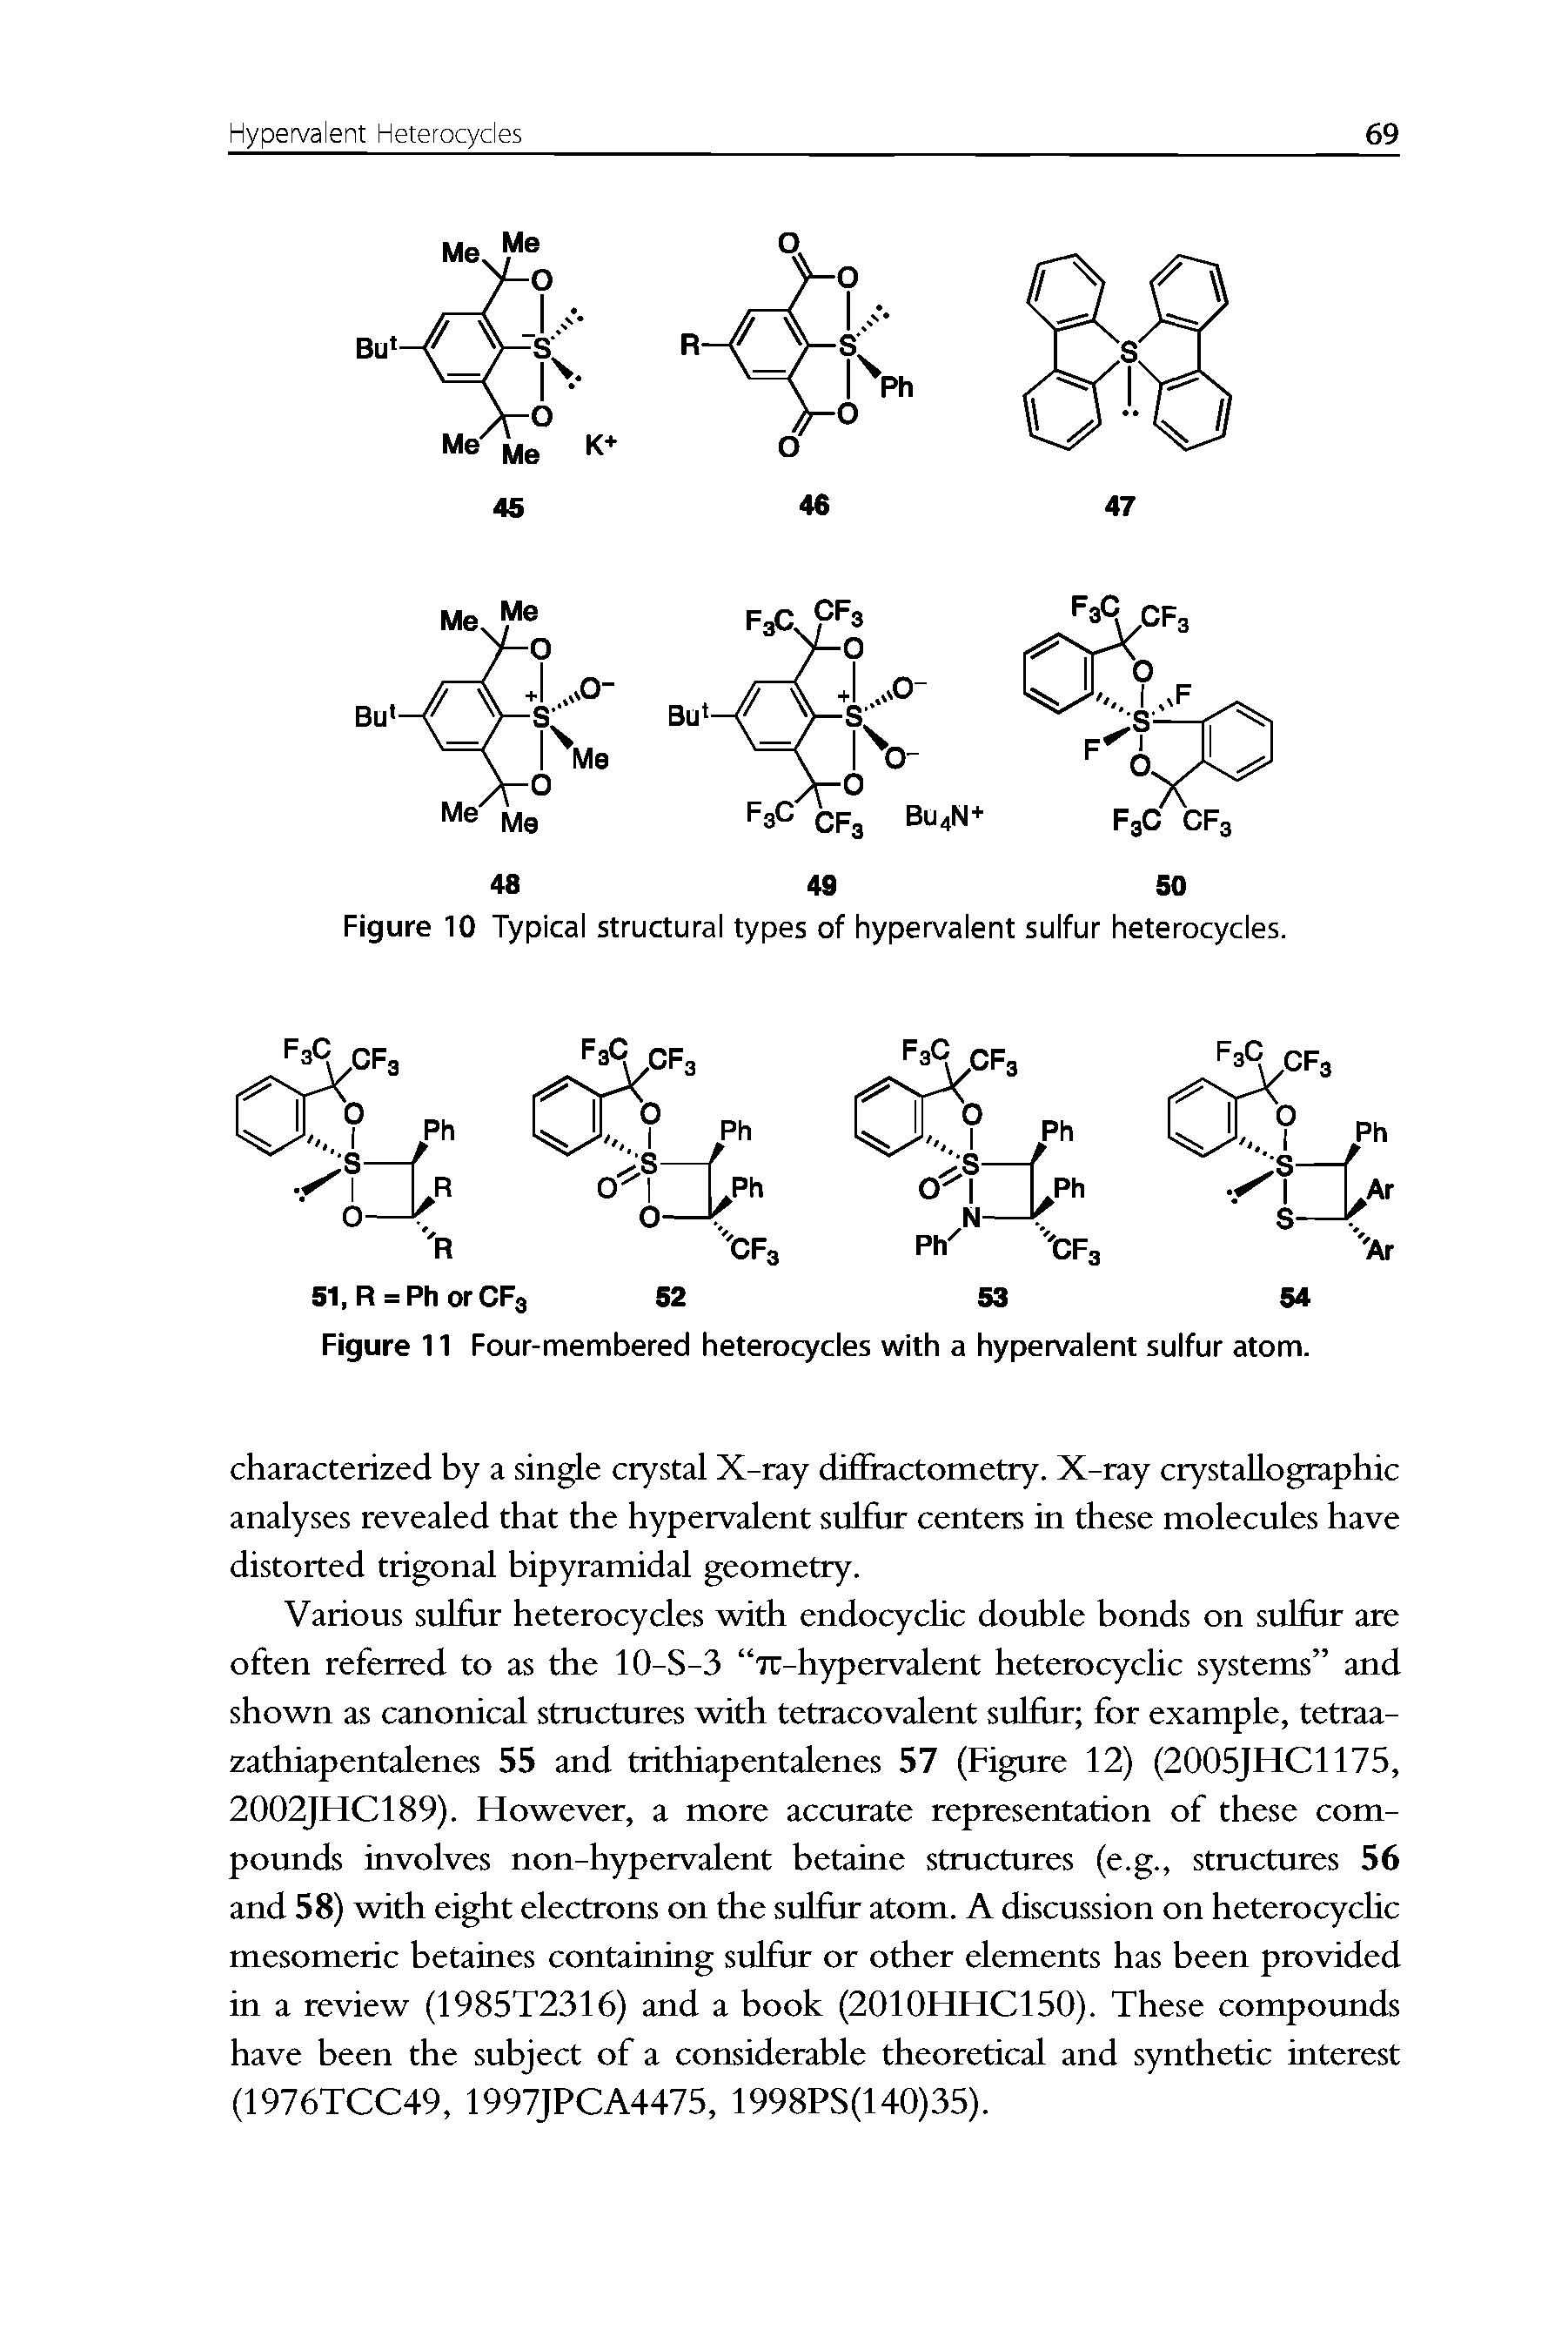 Figure 11 Four-membered heterocycles with a hypervalent sulfur atom.